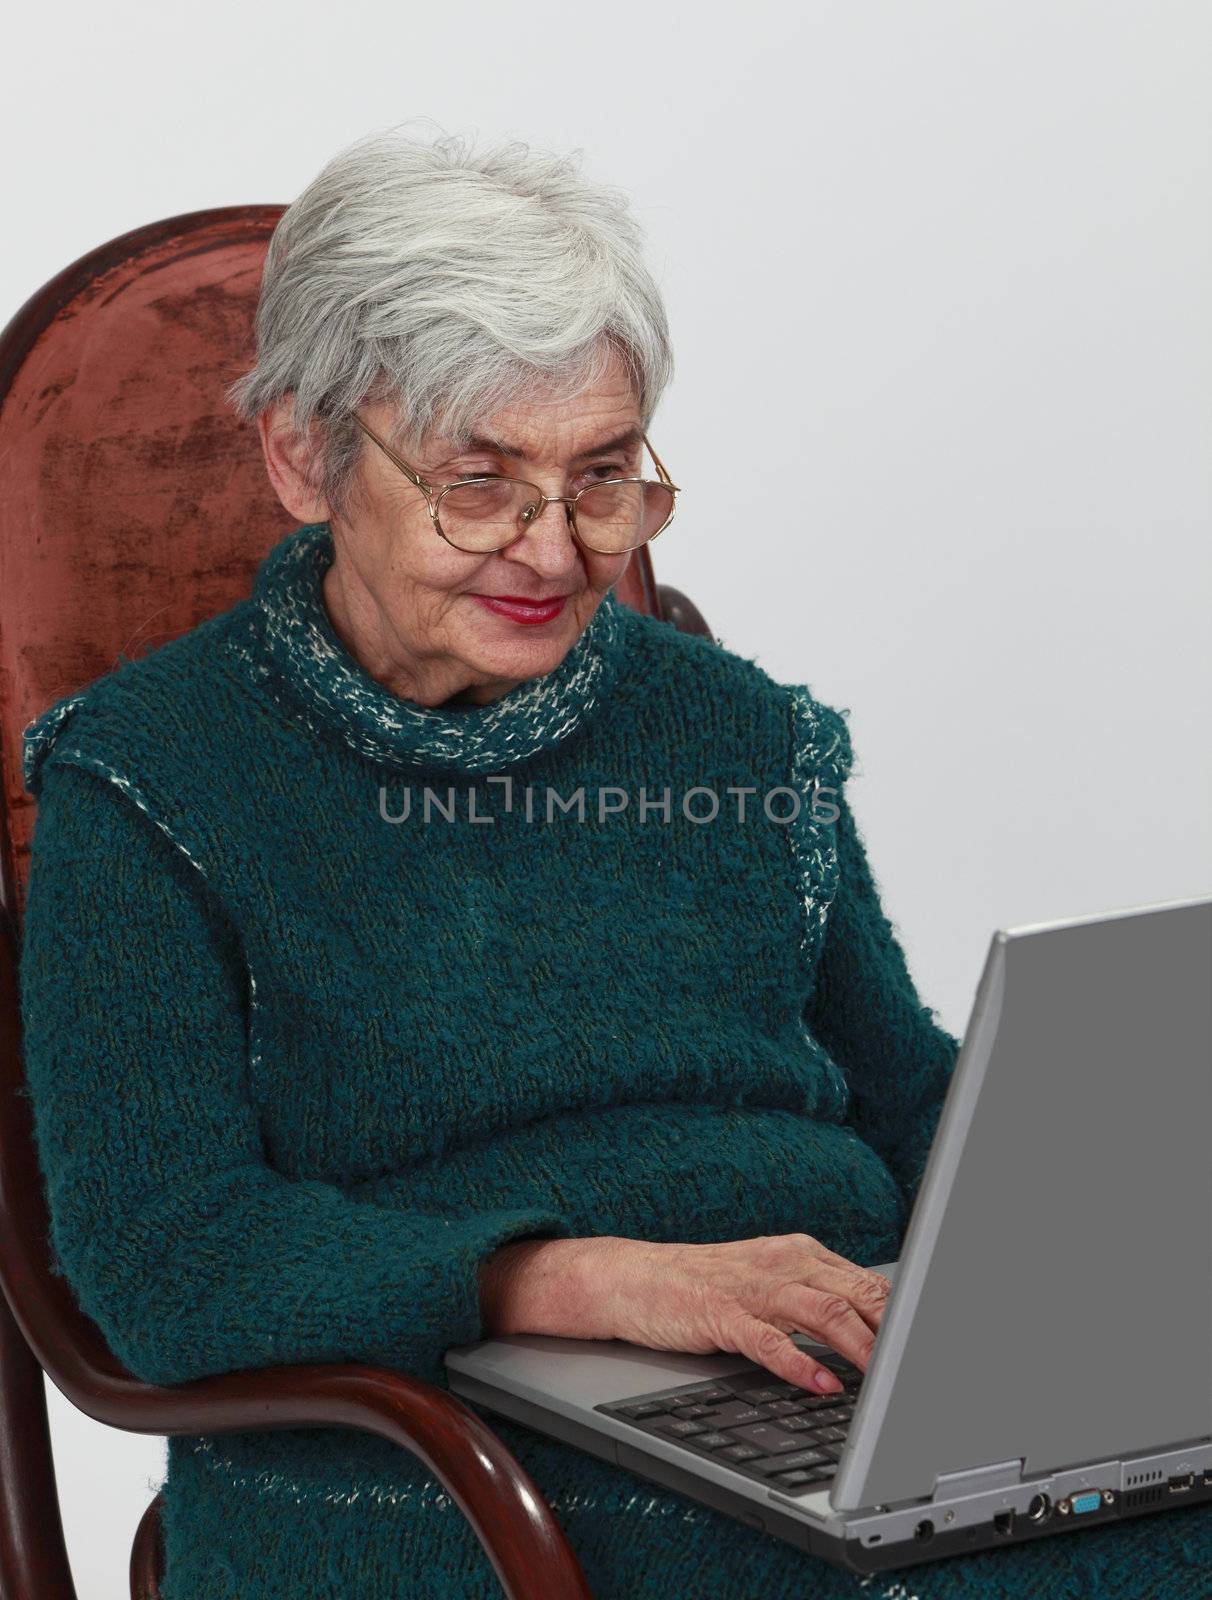 Close-up image of a senior woman using a laptop.